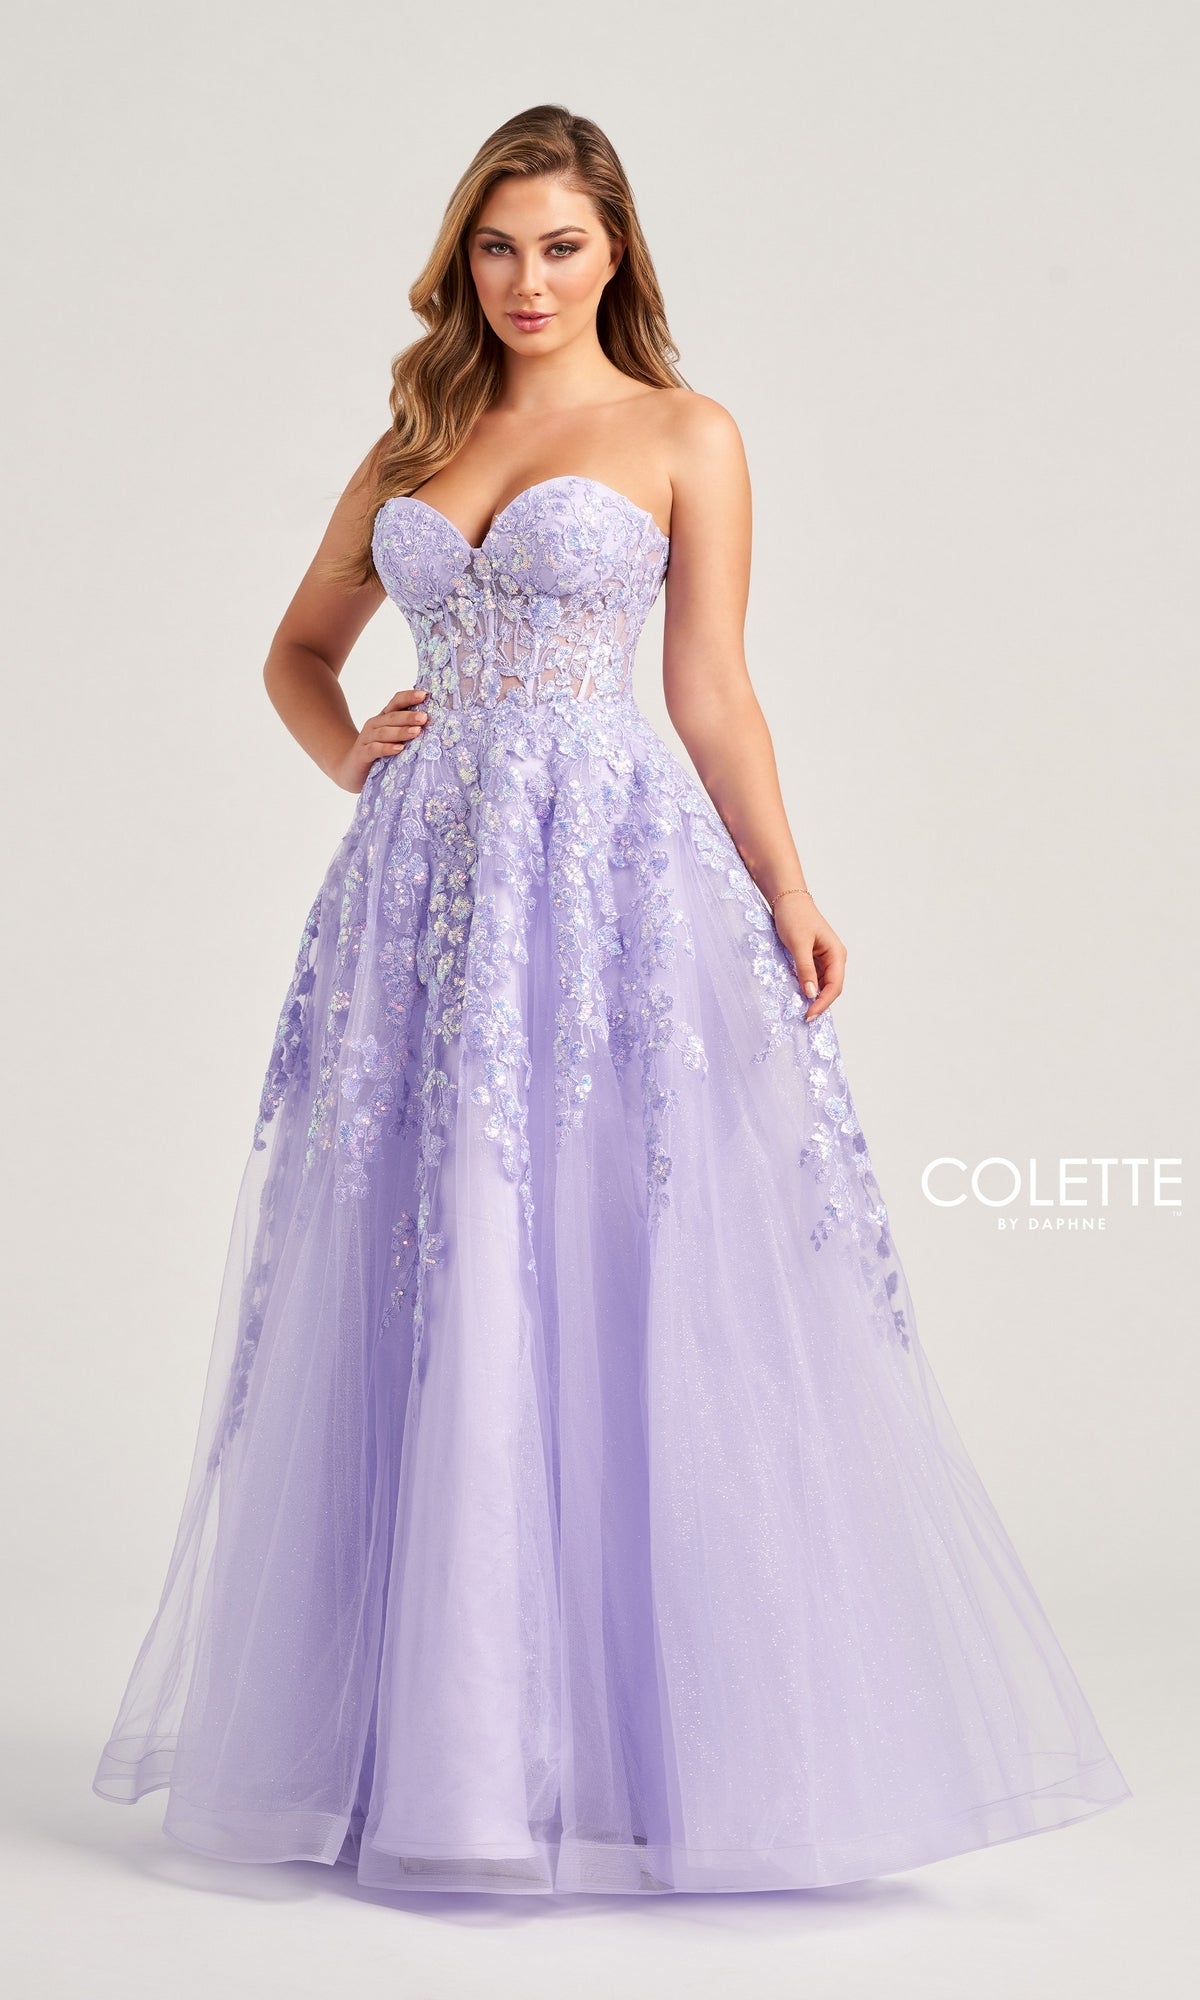 Colette Strapless Sweetheart Prom Ball Gown CL5136